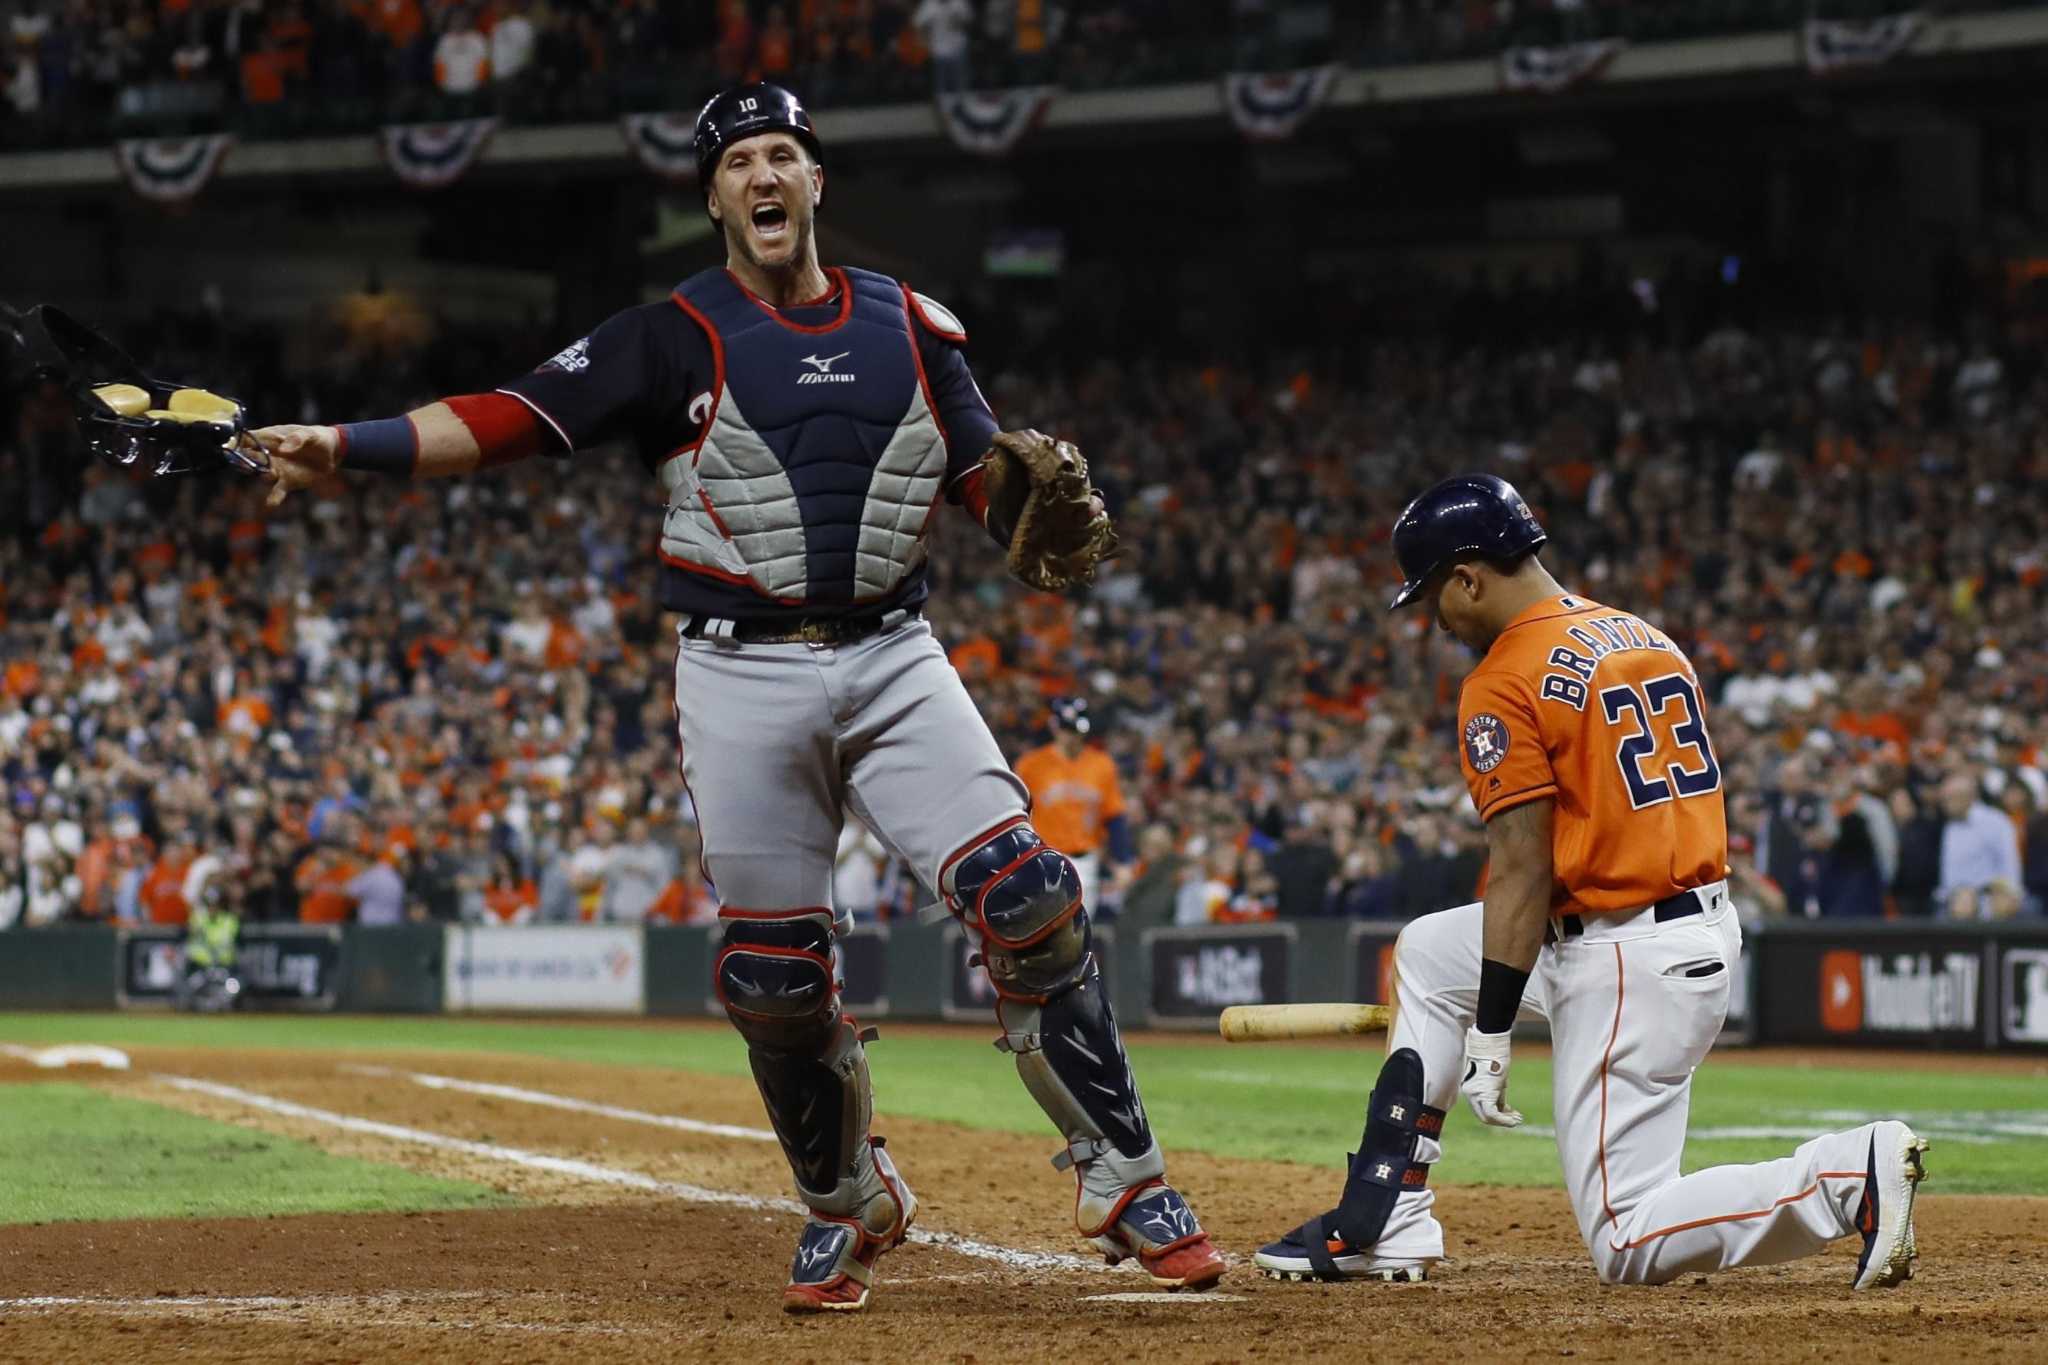 Astros win first World Series championship in franchise history